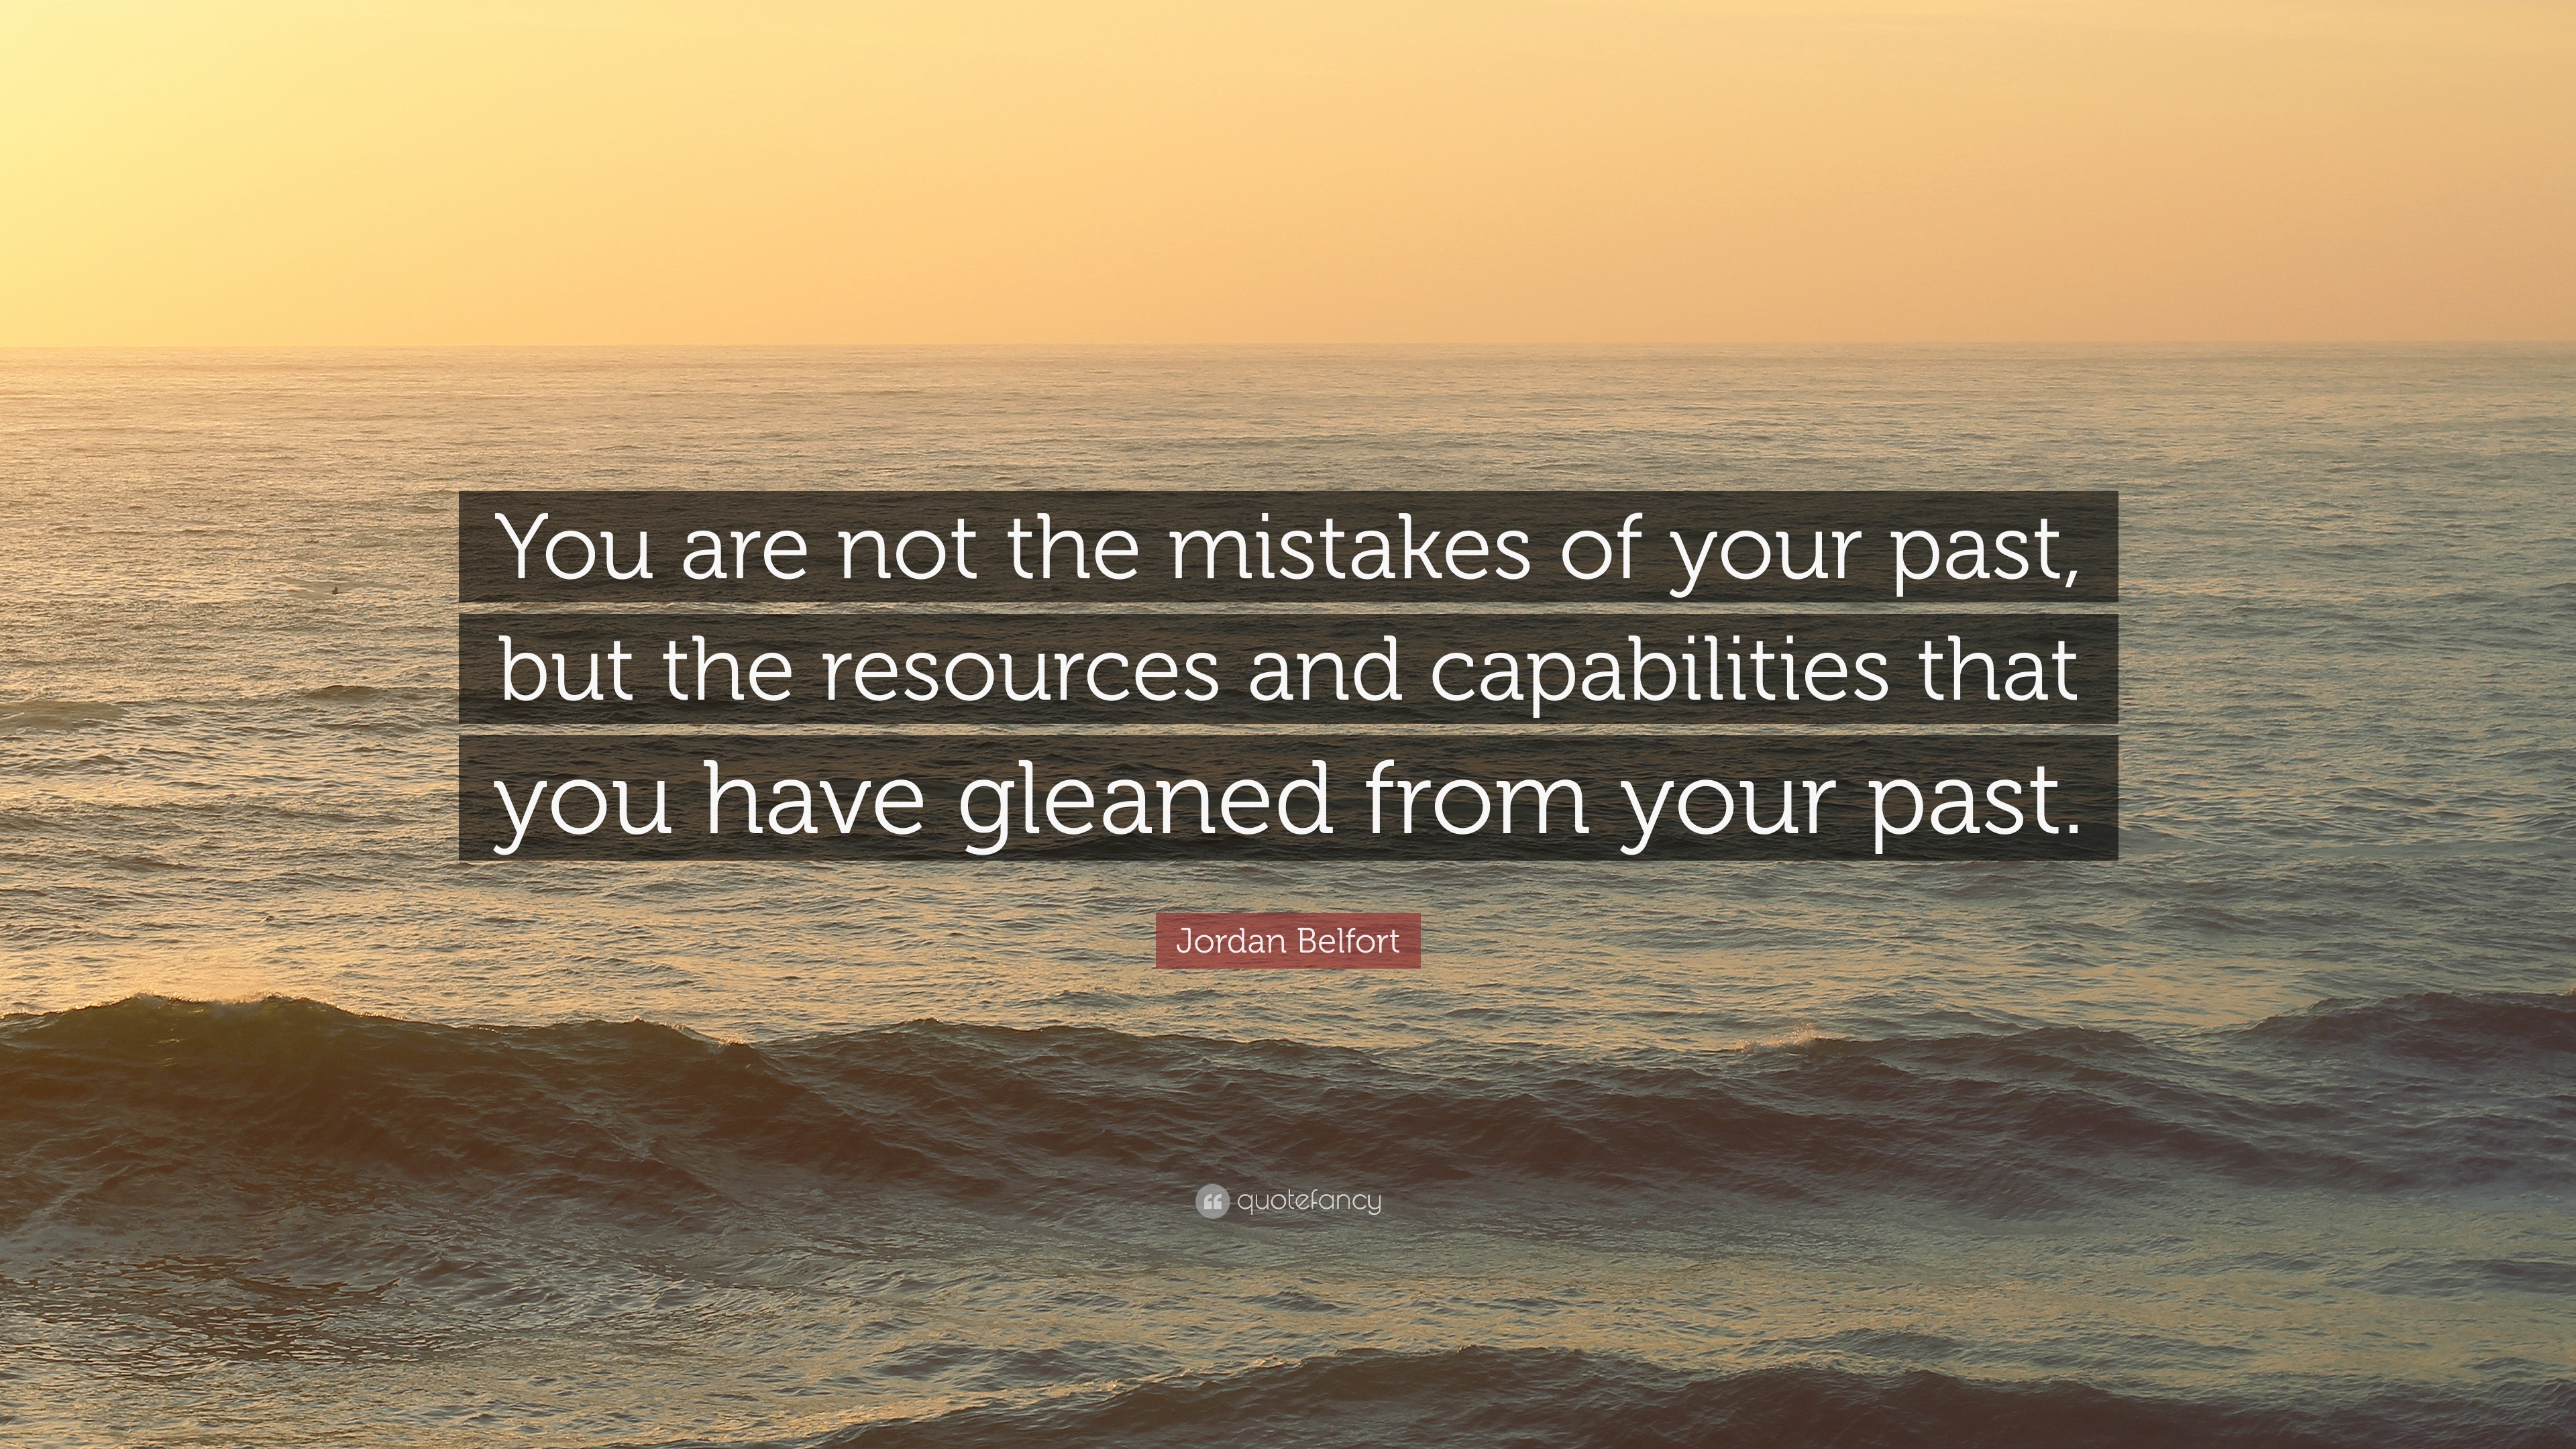 Jordan Belfort Quote: “You are not the mistakes of your past, but the resources and capabilities